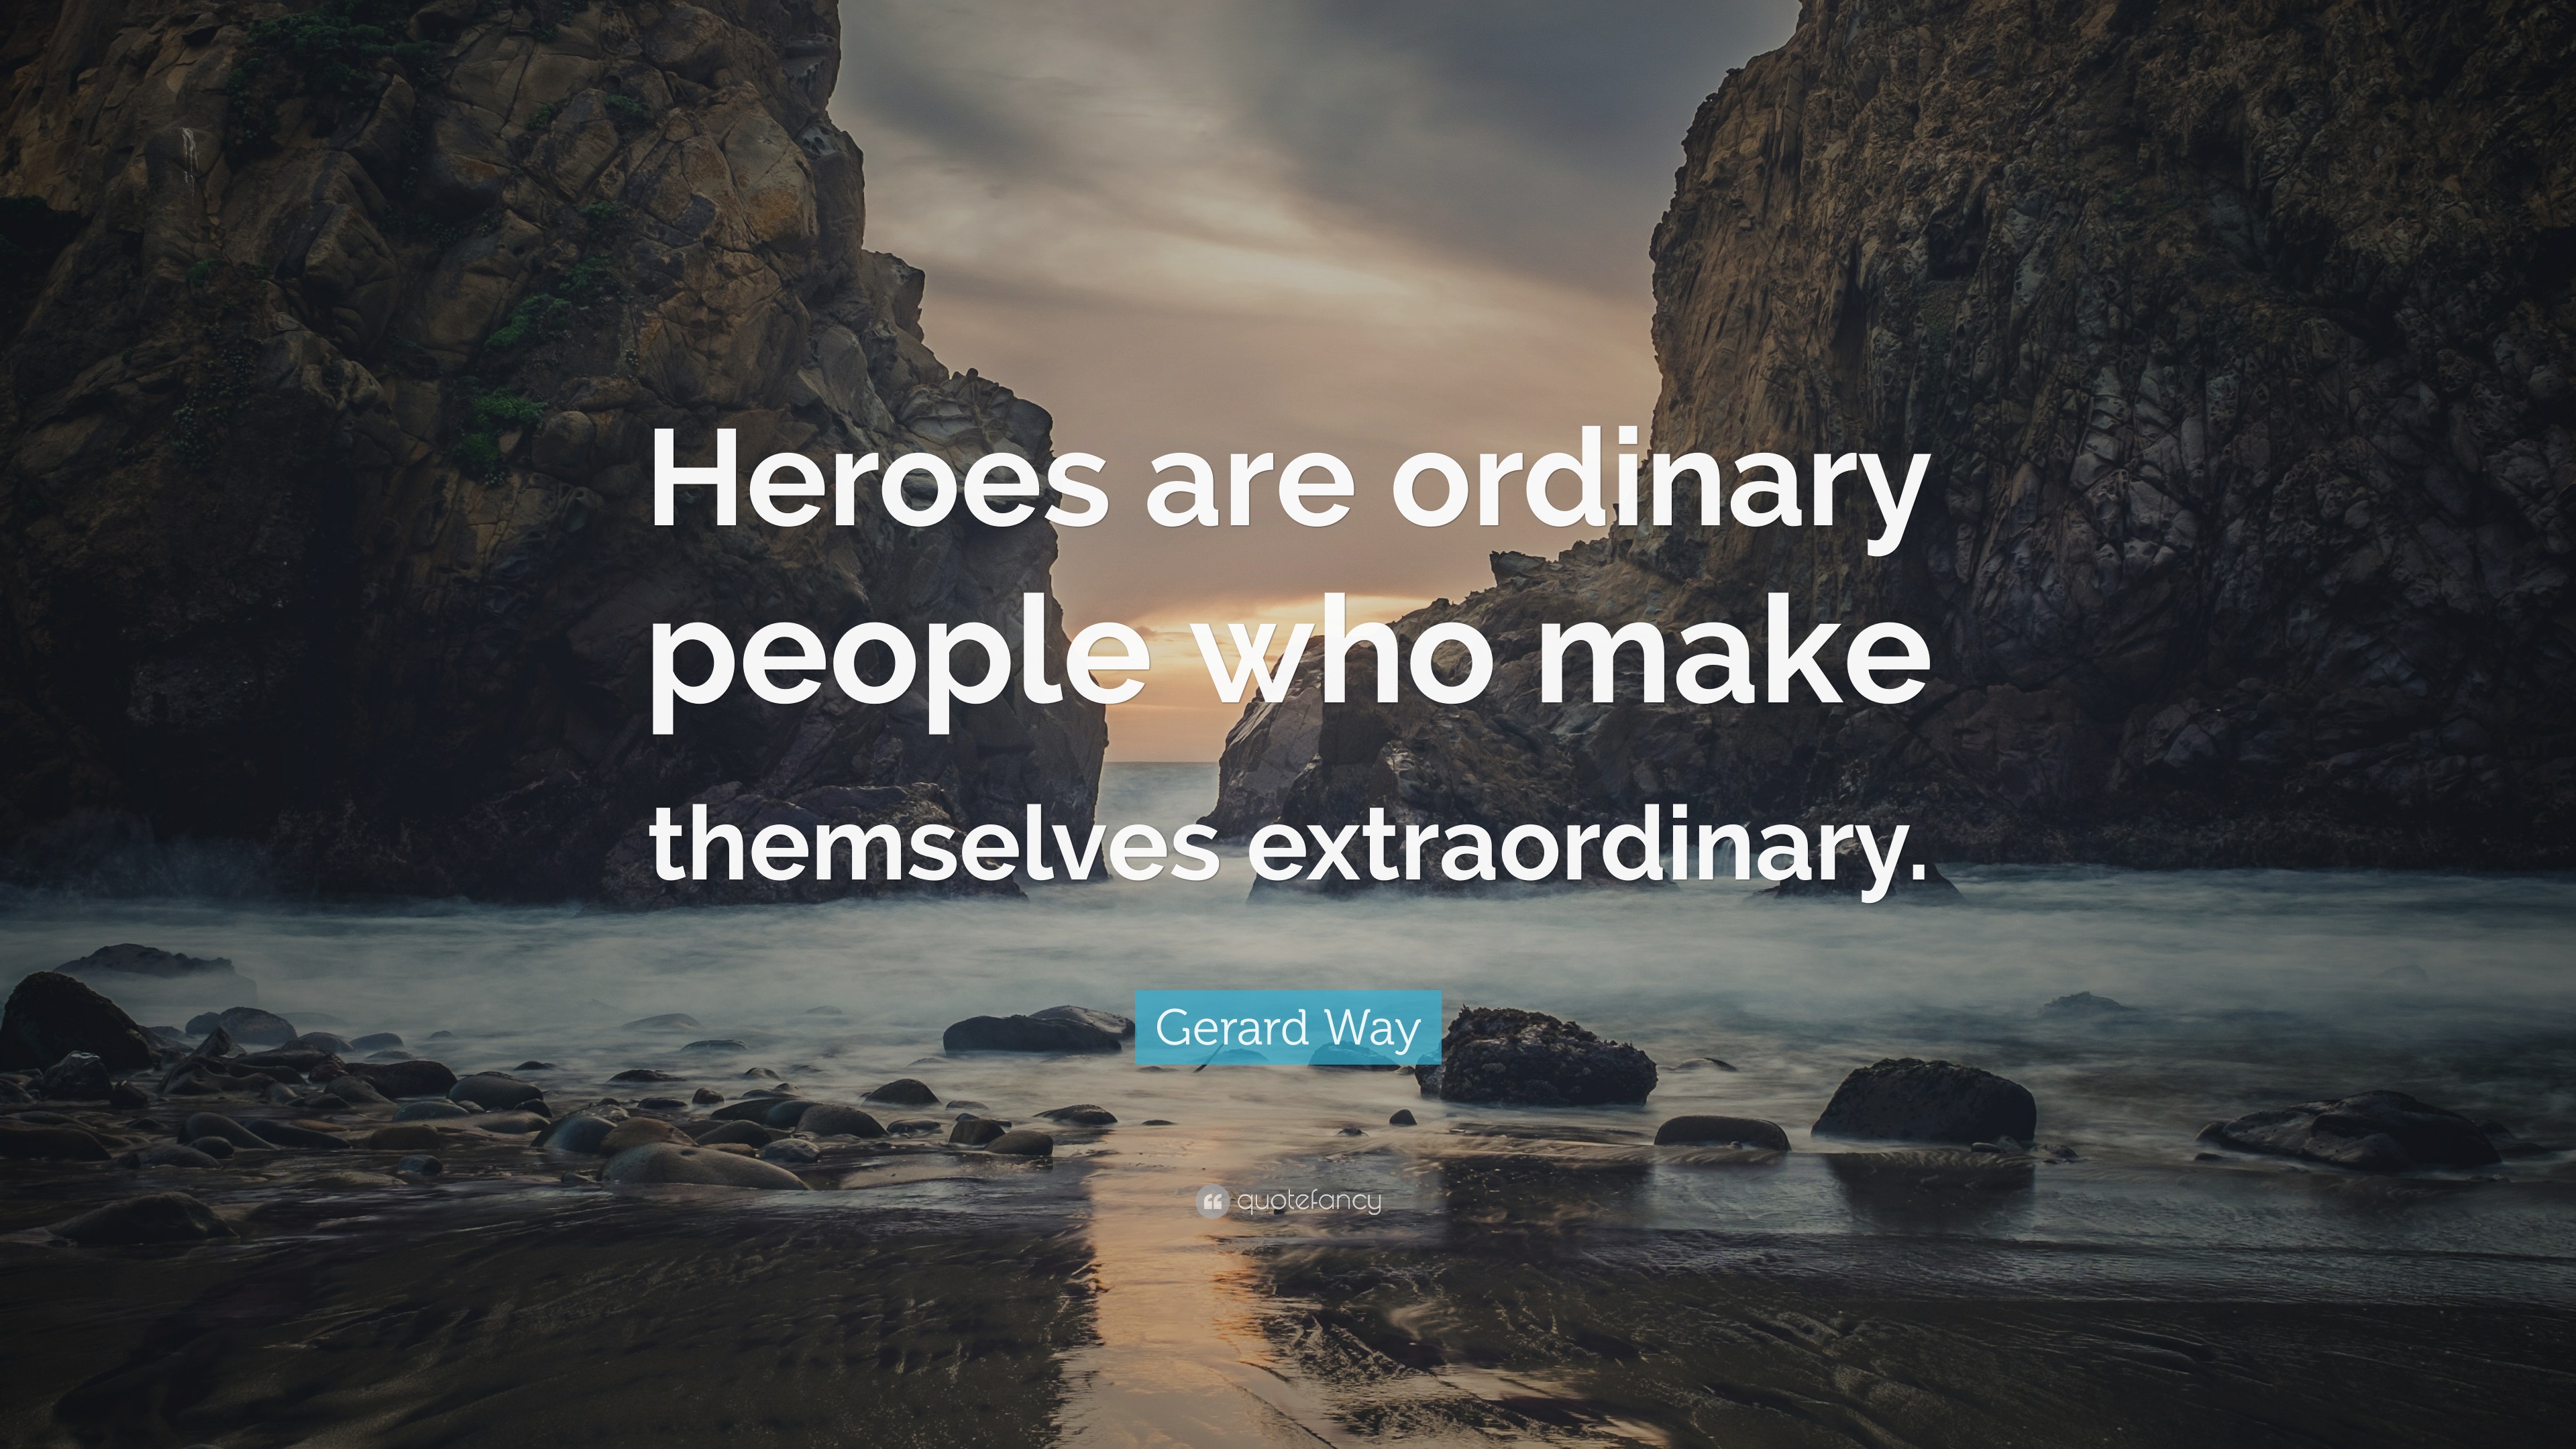 Gerard Way Quote: “Heroes are ordinary people who make themselves